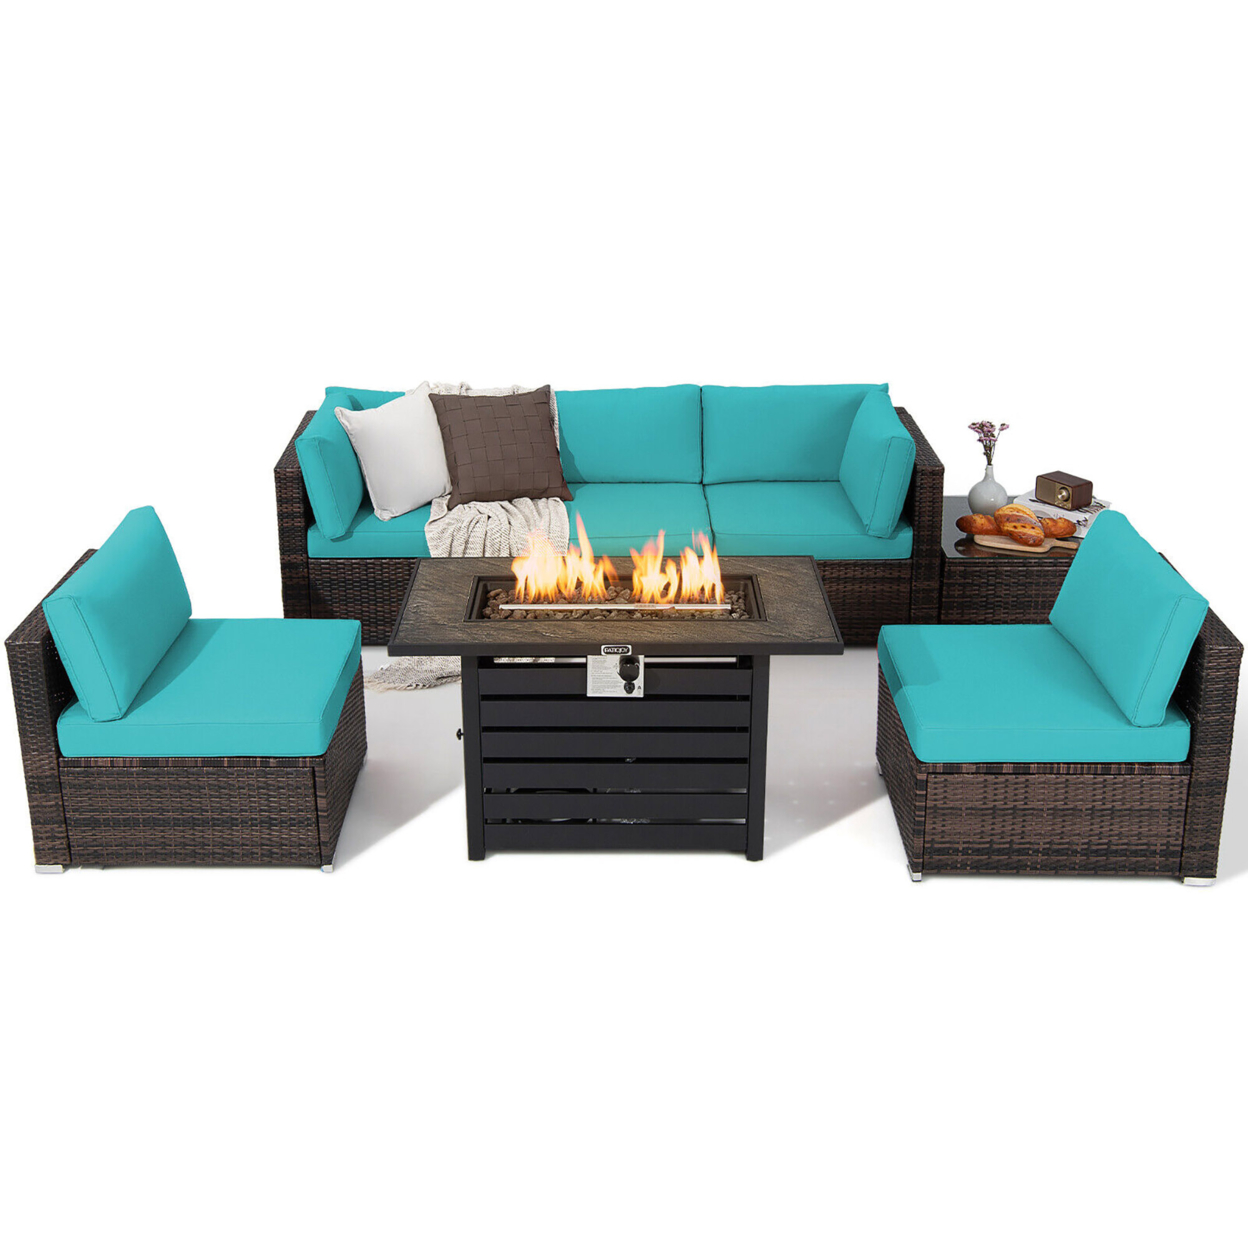 7PCS Patio Rattan Furniture Set 42'' Fire Pit Table W/ Cover Cushioned - Turquoise